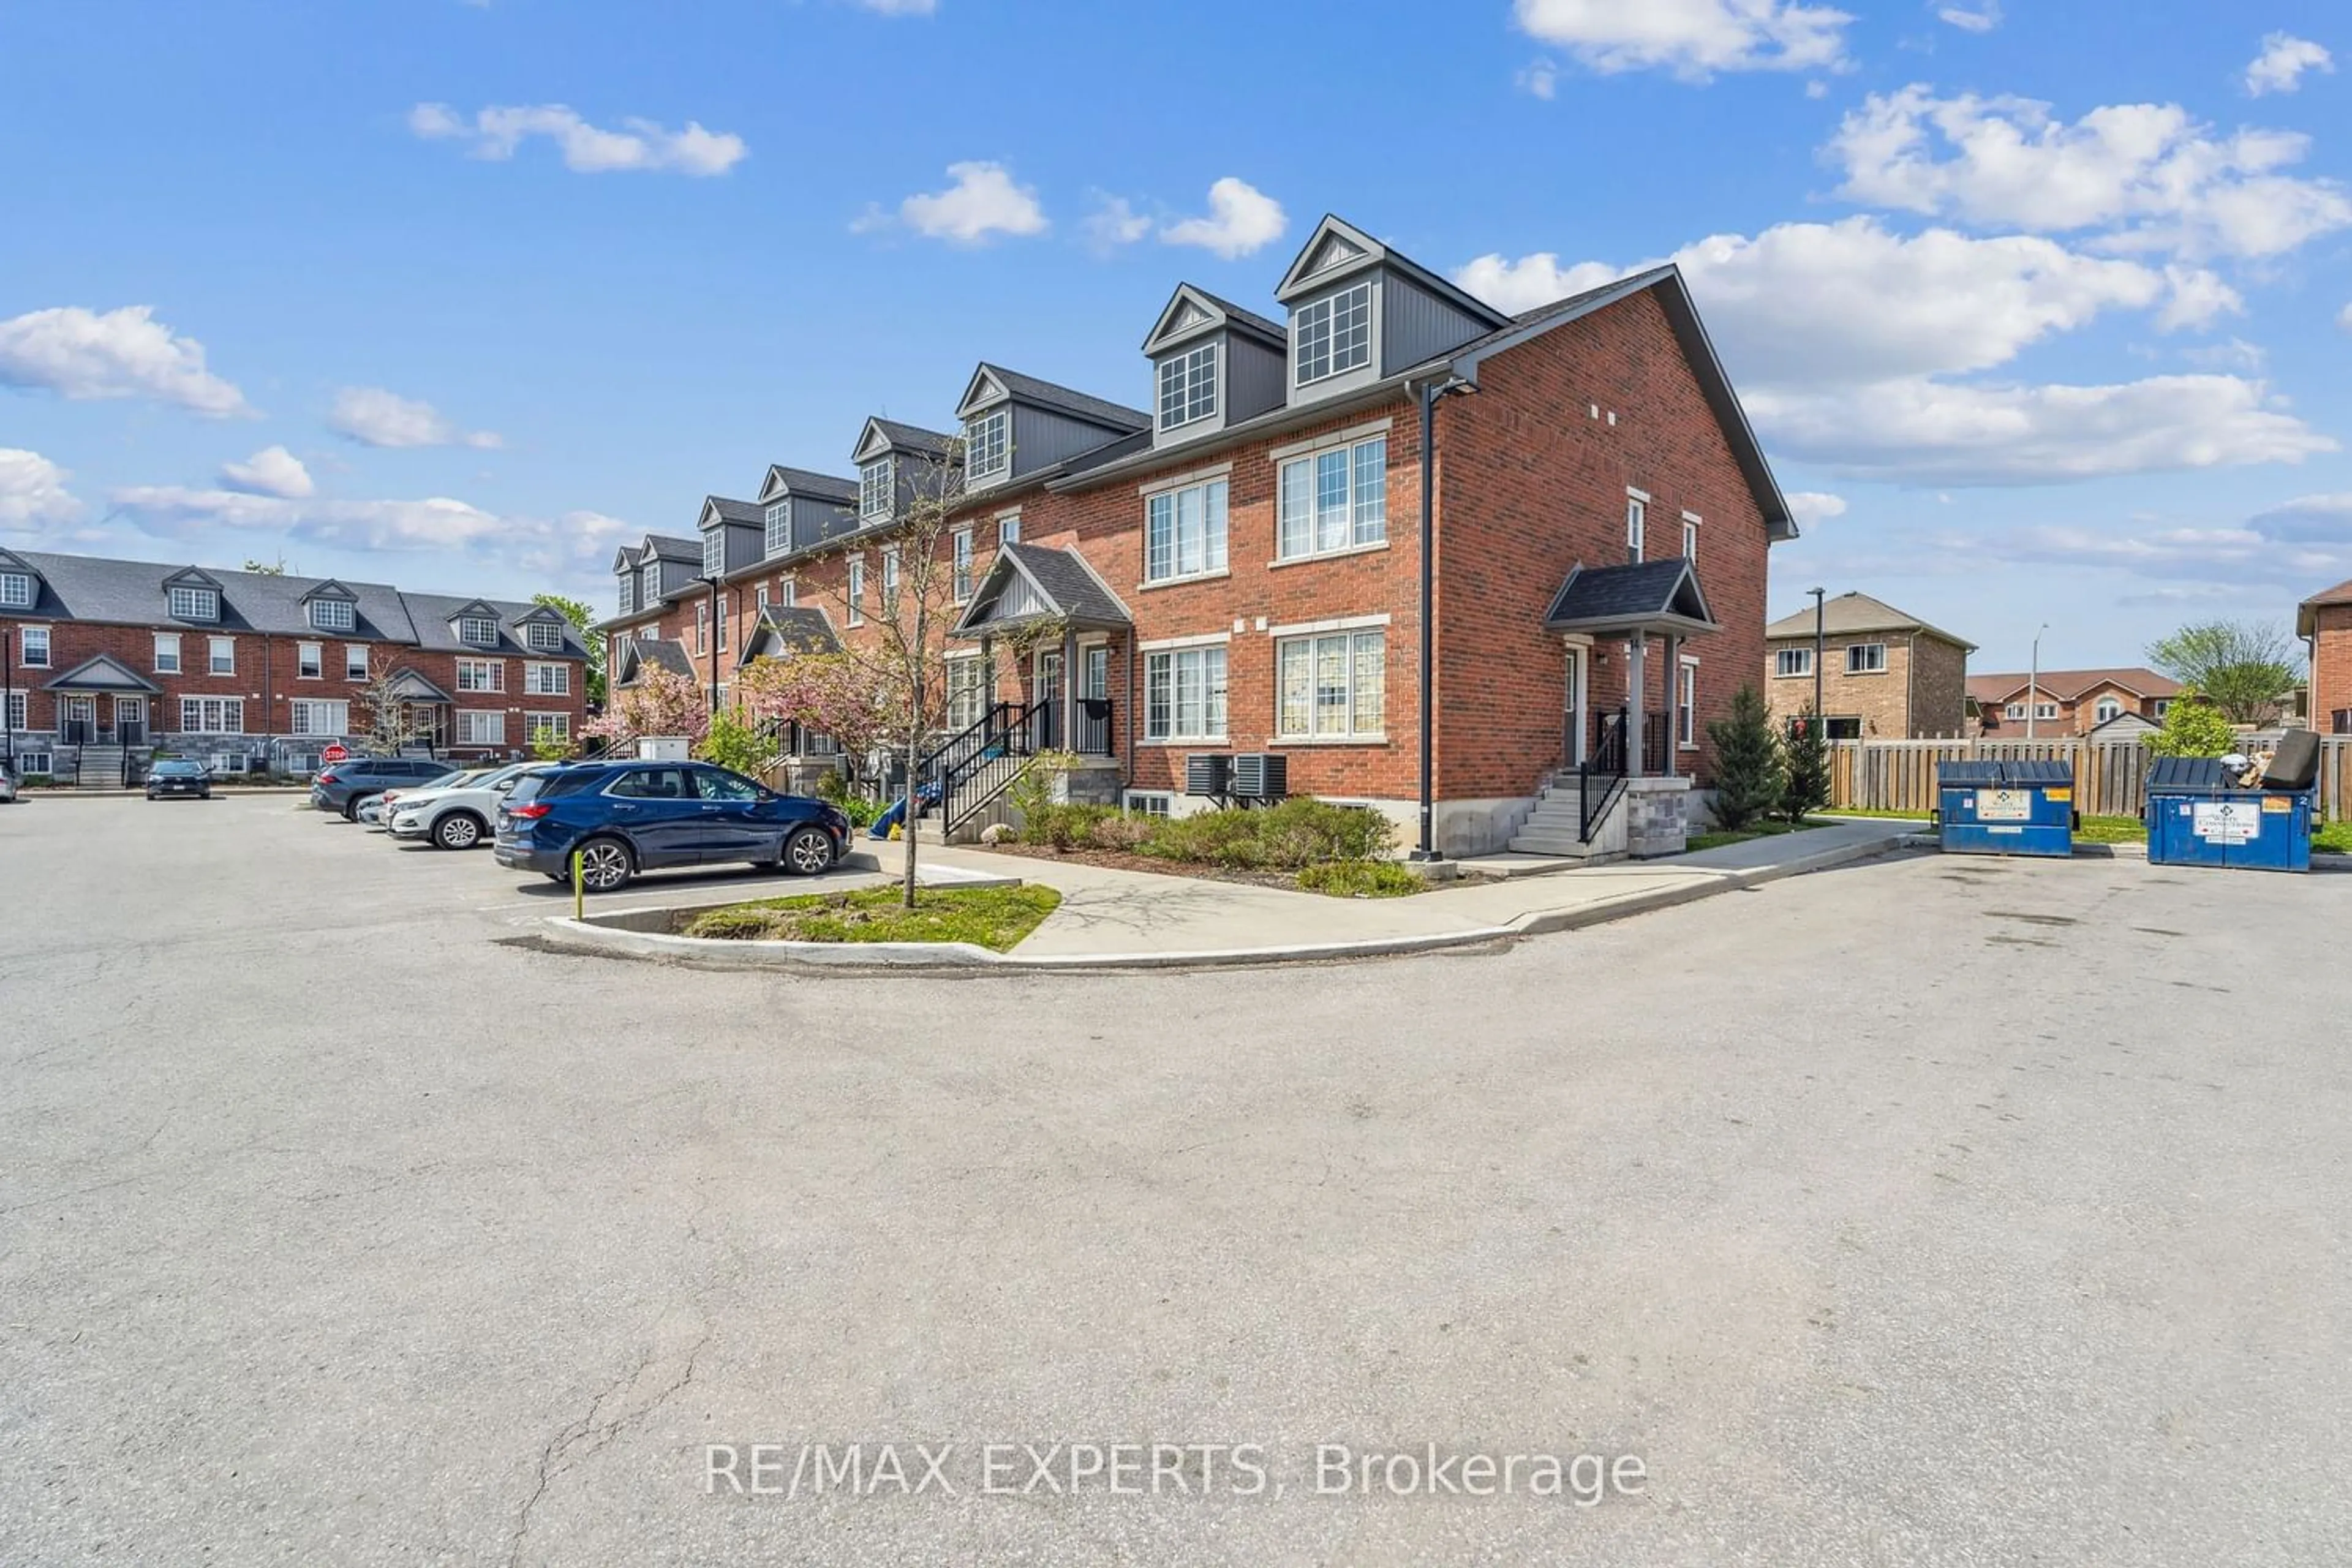 A pic from exterior of the house or condo for 246 Penetanguishene Rd #13, Barrie Ontario L4M 7C2